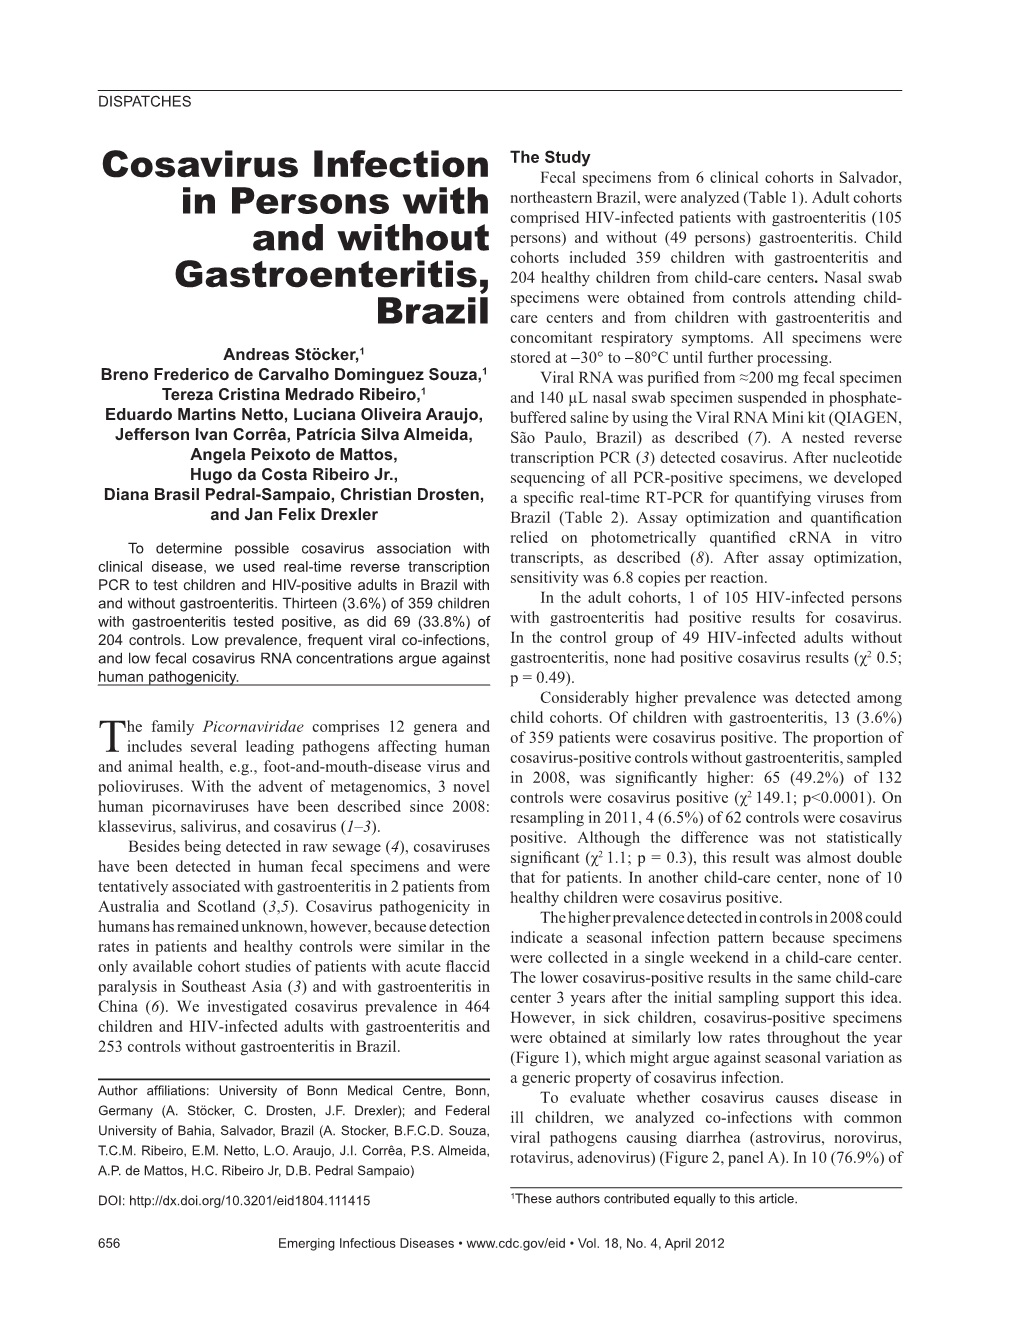 Cosavirus Infection in Persons with and Without Gastroenteritis, Brazil